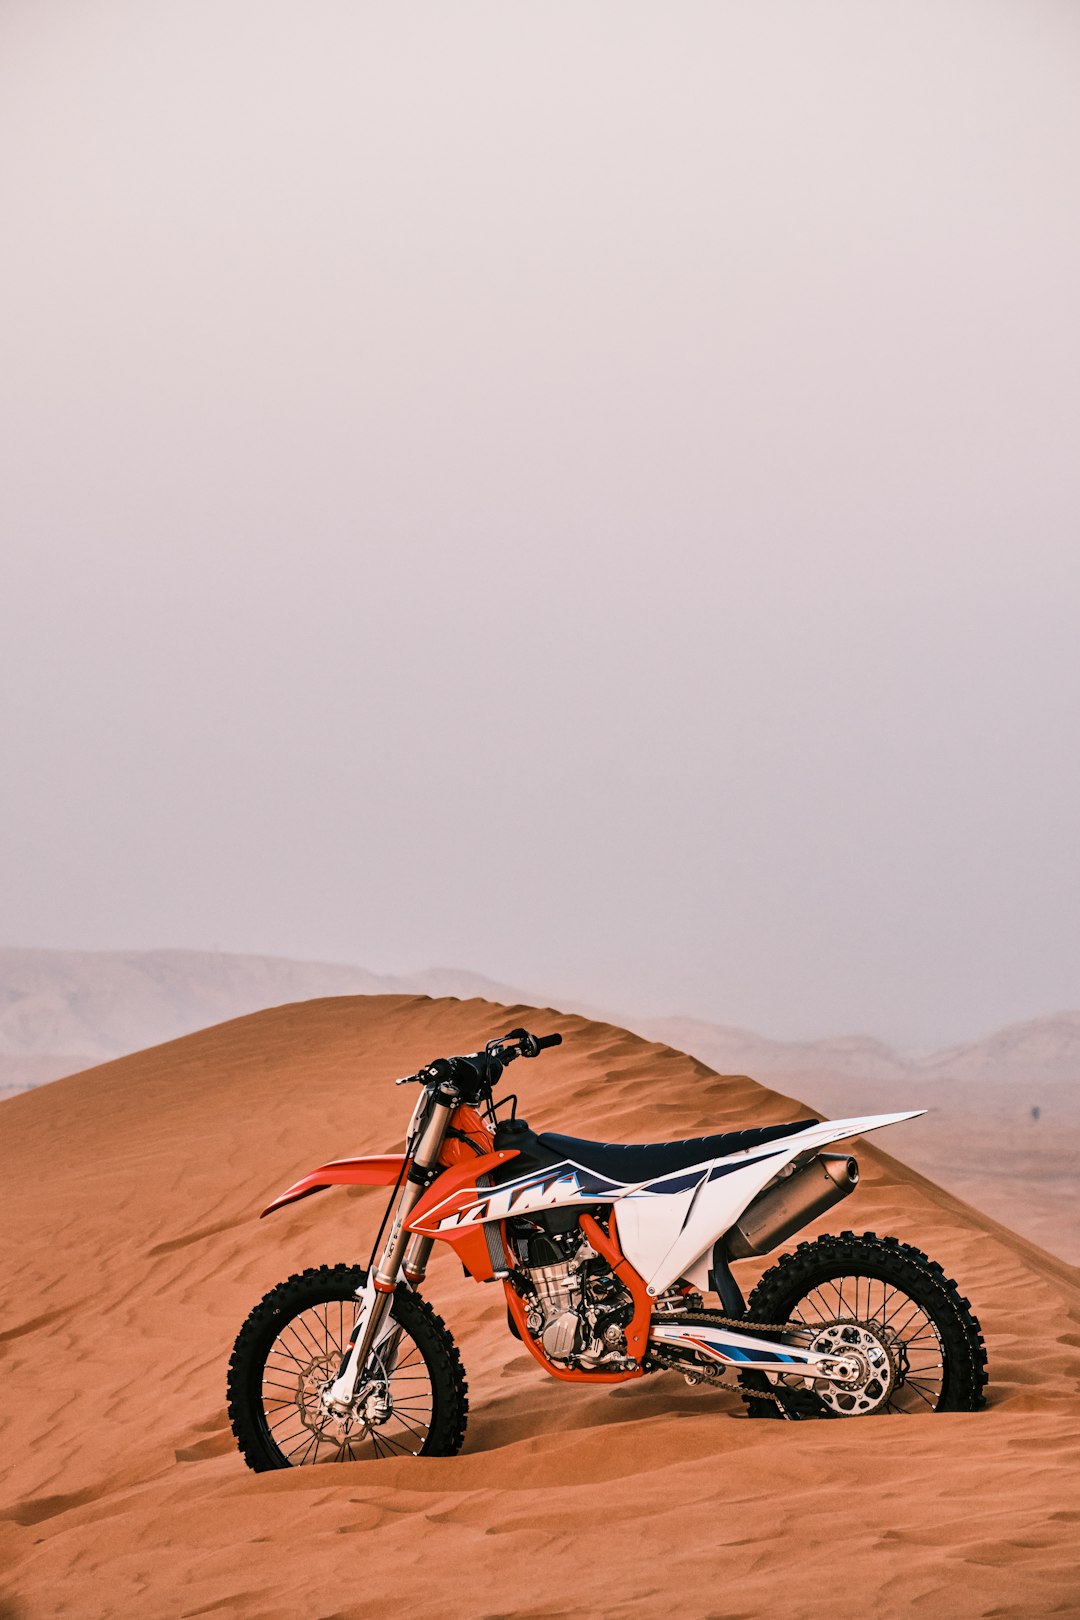 red and black motocross dirt bike on brown sand